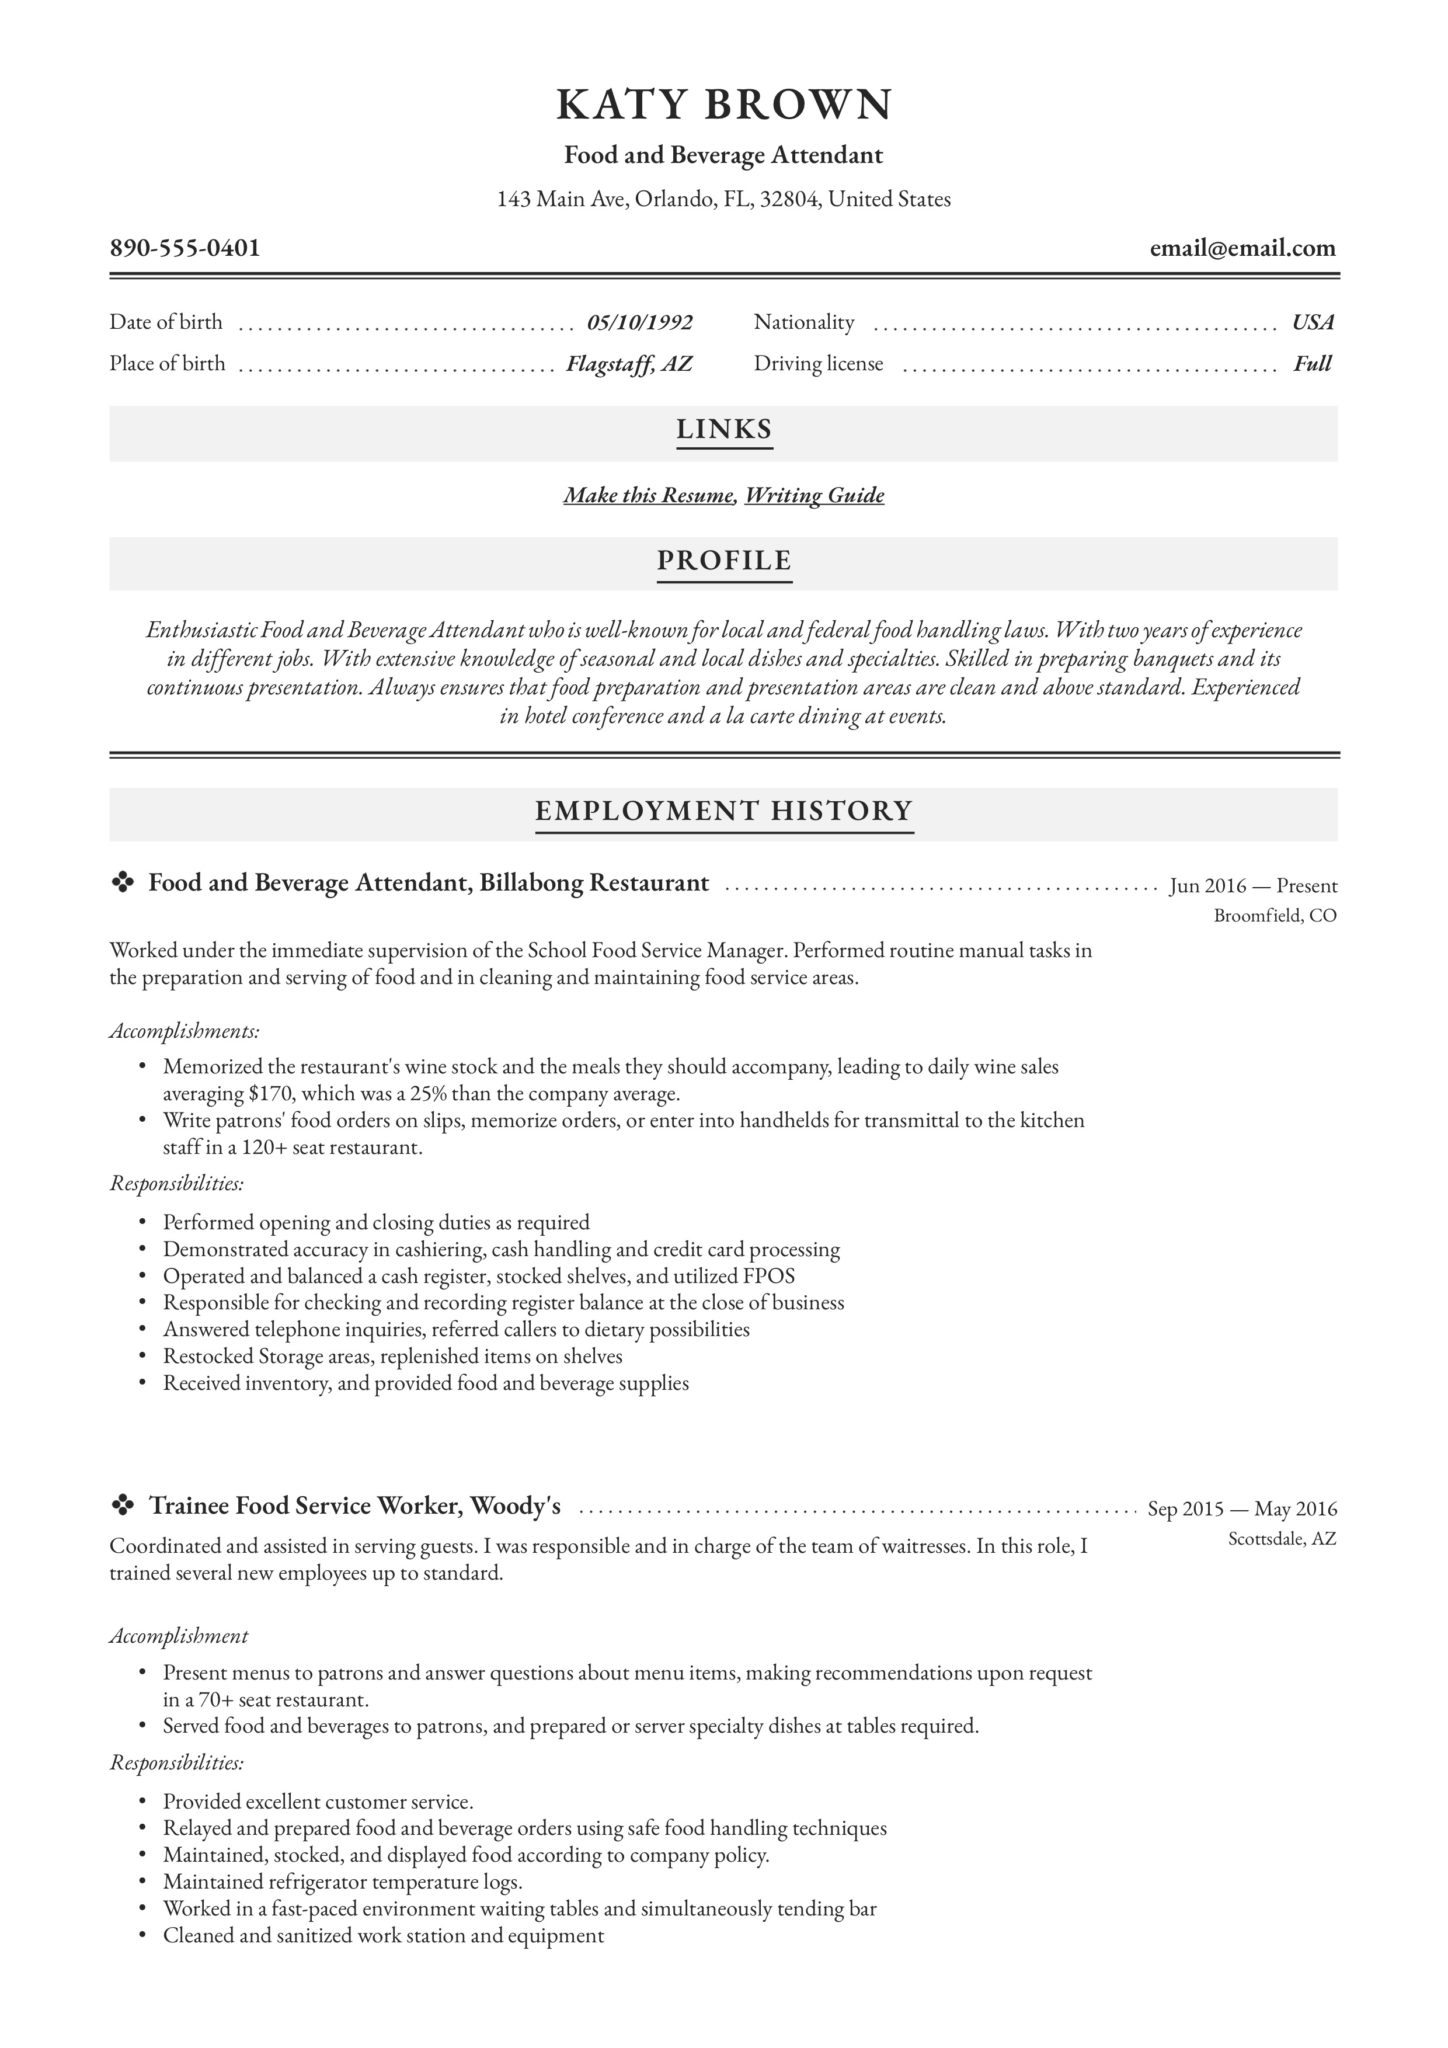 classic professional and conservative resume design food and beverage attendant